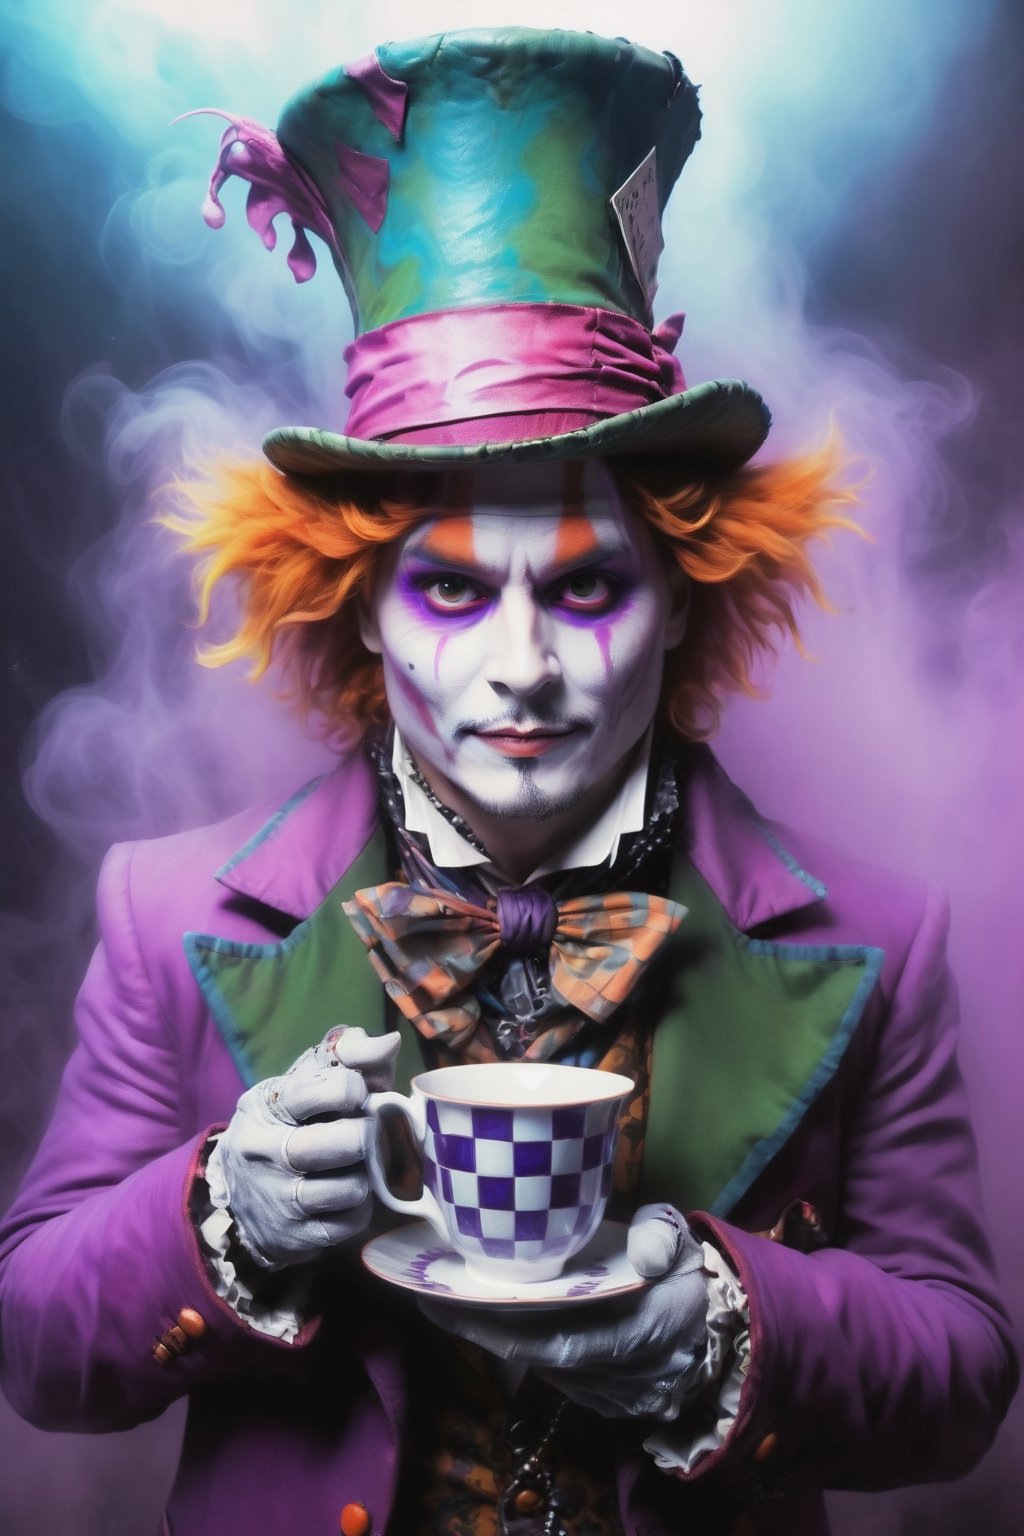 cyberpunk (mad hatter johnny depp in wonderland:1.3) holding a cup of tea,cyberpunk style,mysterious magical ground fog,bioluminiscent drink,graffito,mist,incredible detailed,soft neon light,cinematic,iridescent purple,vivid details,robotic bionic features,whimiscal toxic dust,hyperrealistic masterwork by head of prompt engineering 